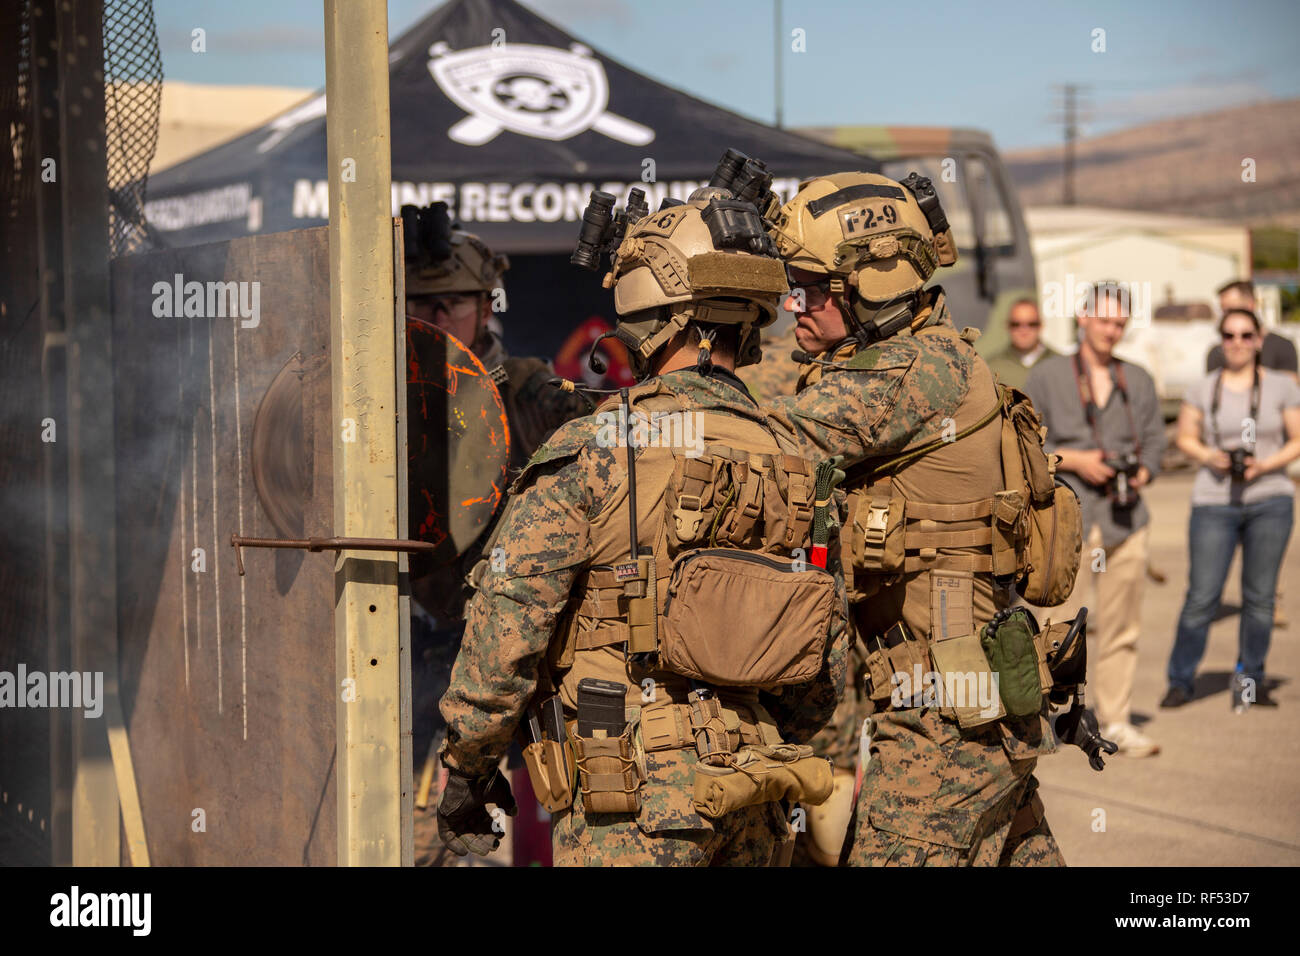 U.S. Marines and Sailors with Maritime Raid Forces, 31st Marine Expeditionary Unit showcase tactical capabilities at Kalaeloa Airport, Hawaii, Jan. 19, 2019. The MEU invited the public to attend a free tactical demonstration and gave them an opportunity to meet the Marines and view the equipment used during the events. (U.S. Marine Corps photo by Lance Cpl. Eric Tso.) Stock Photo